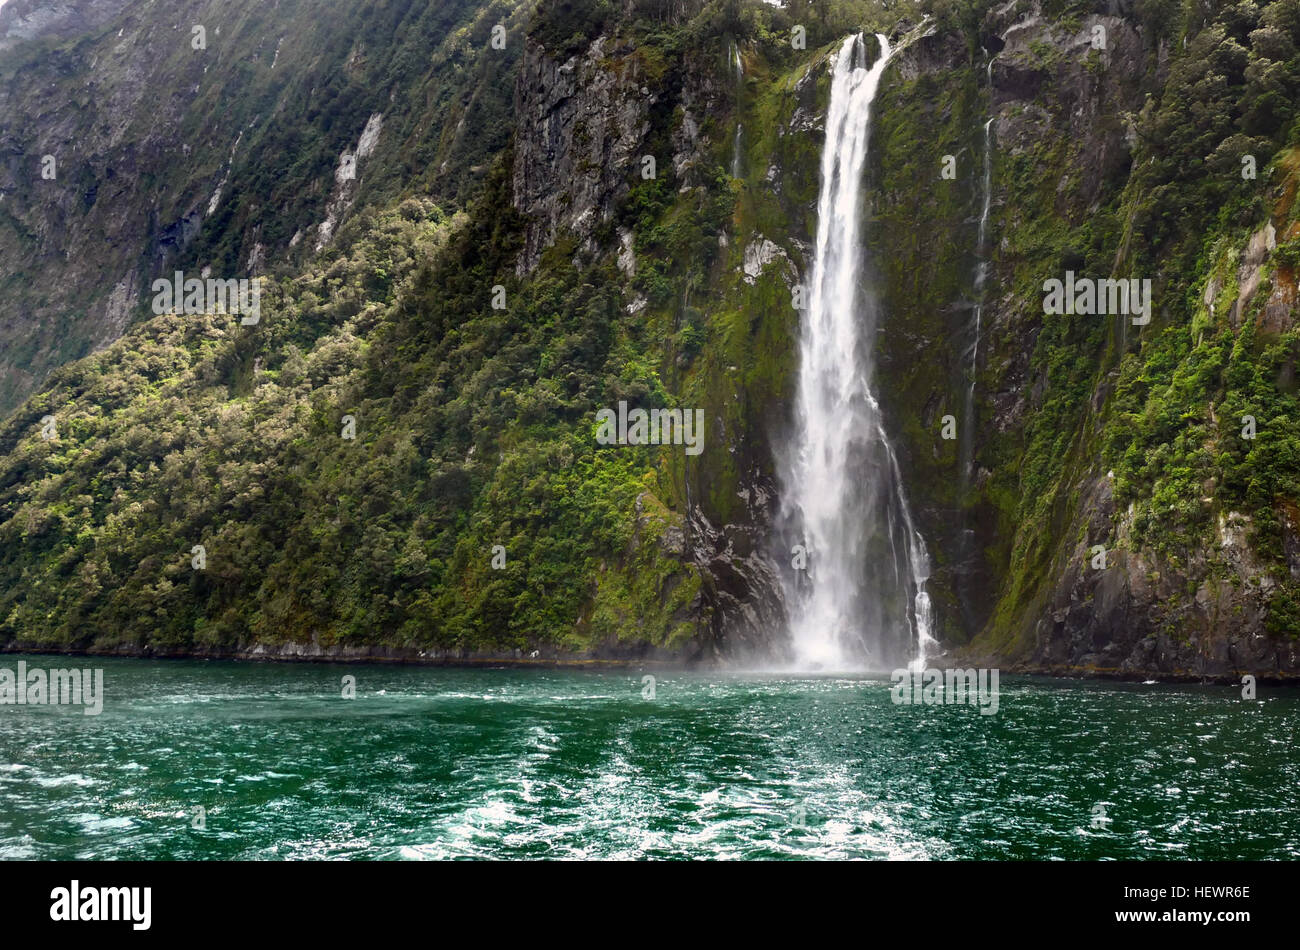 One of the Must See New Zealand Waterfalls, Stirling Falls, second name Waimanu Falls, is the most magnificent waterfall in the world's famous Milford Sound. Accessible via a Milford Sound Cruise or a Milford Sound Scenic Flight. Stock Photo